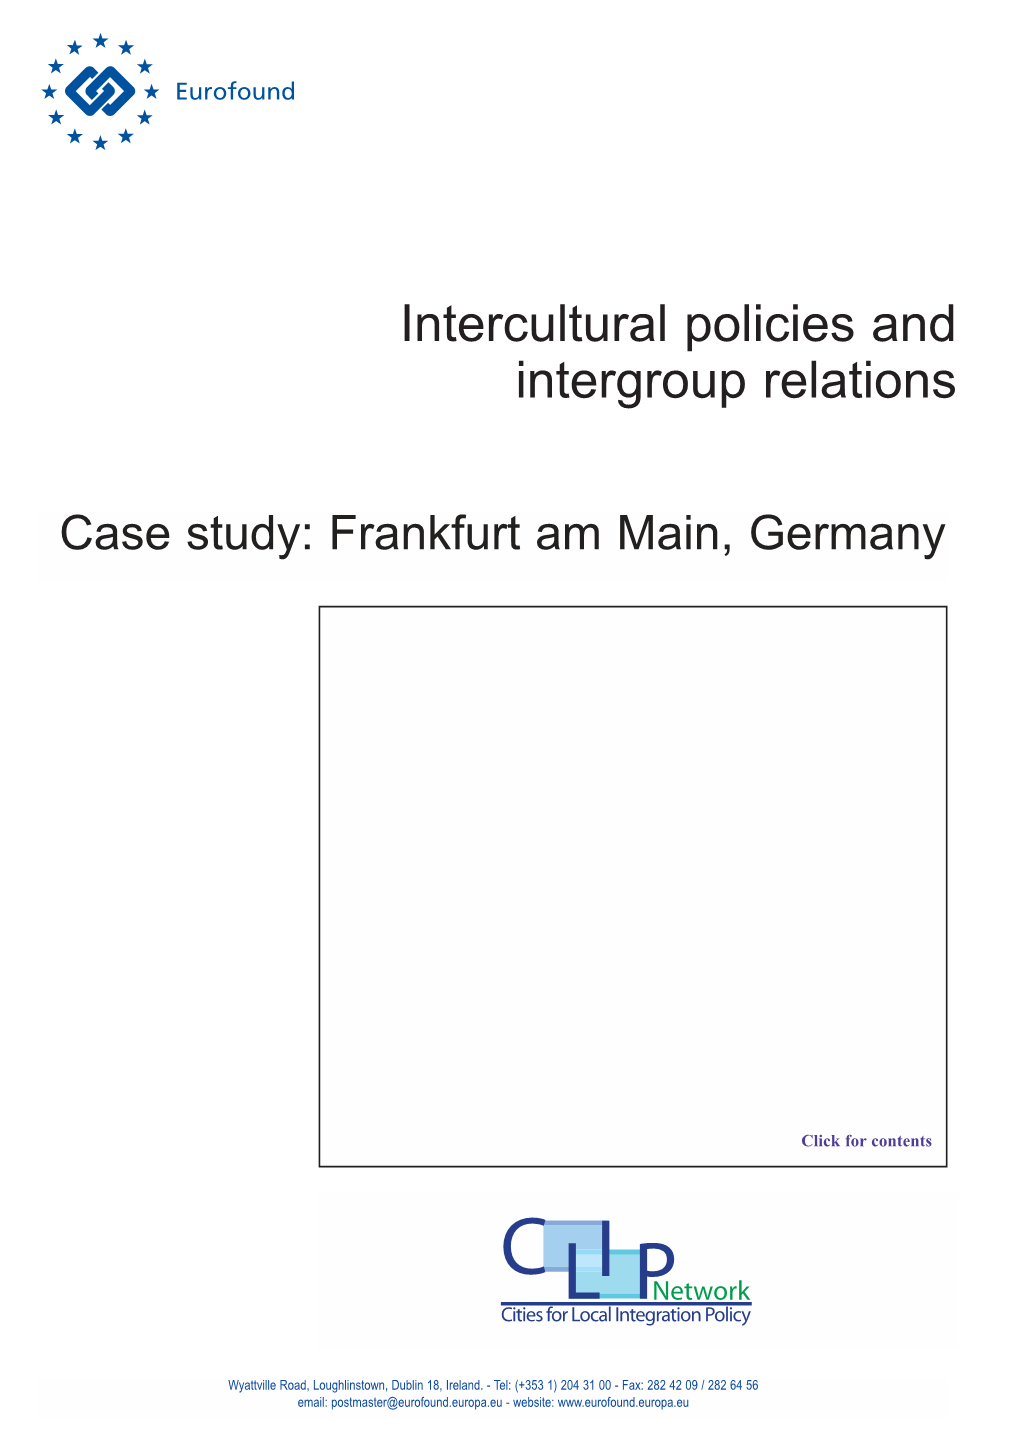 Intercultural Policies and Intergroup Relations